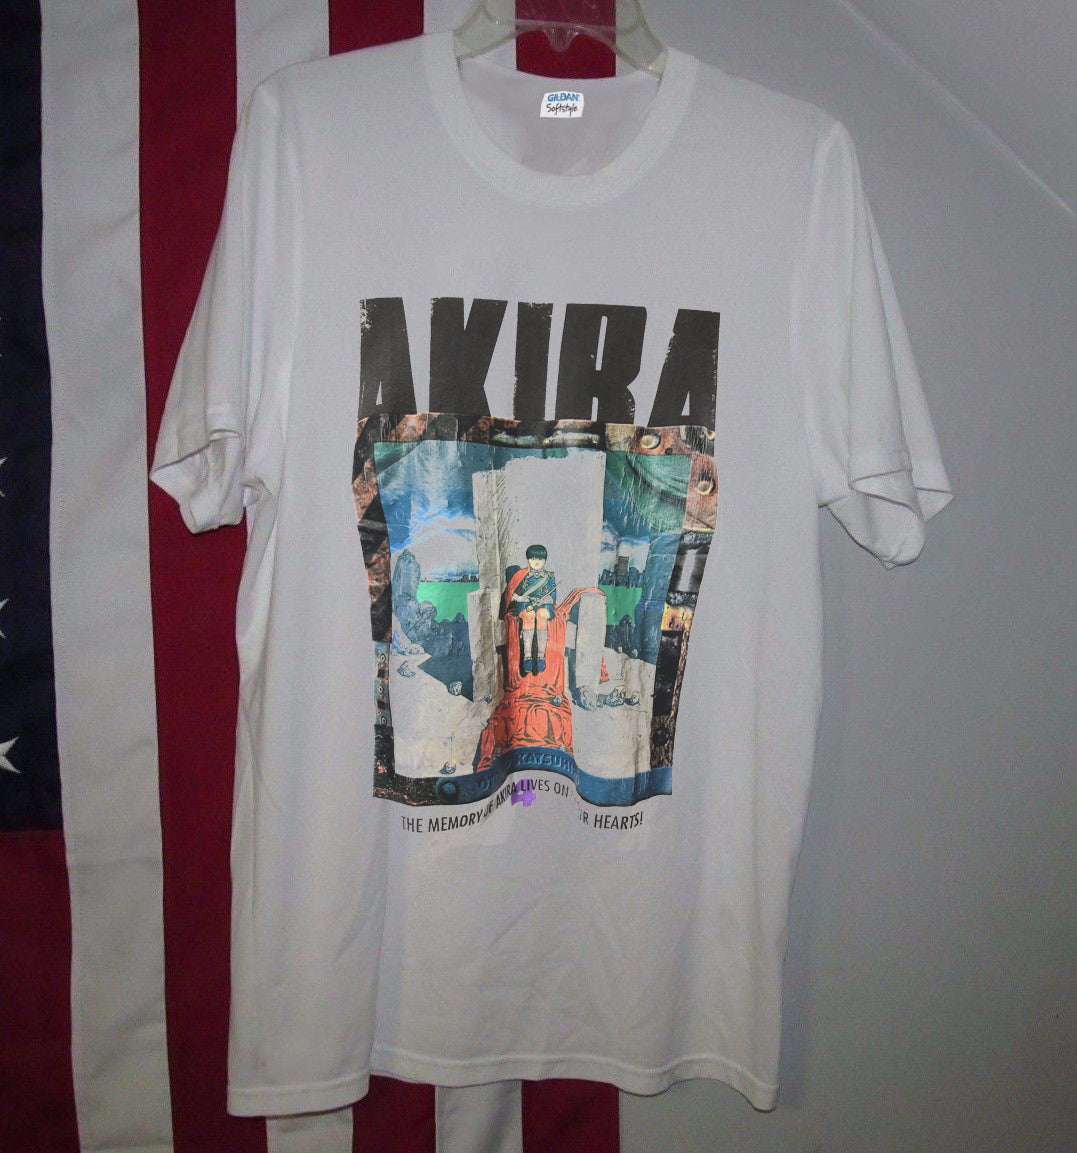 Akira T Shirt Vintage 90s The memory of akira in our hearts